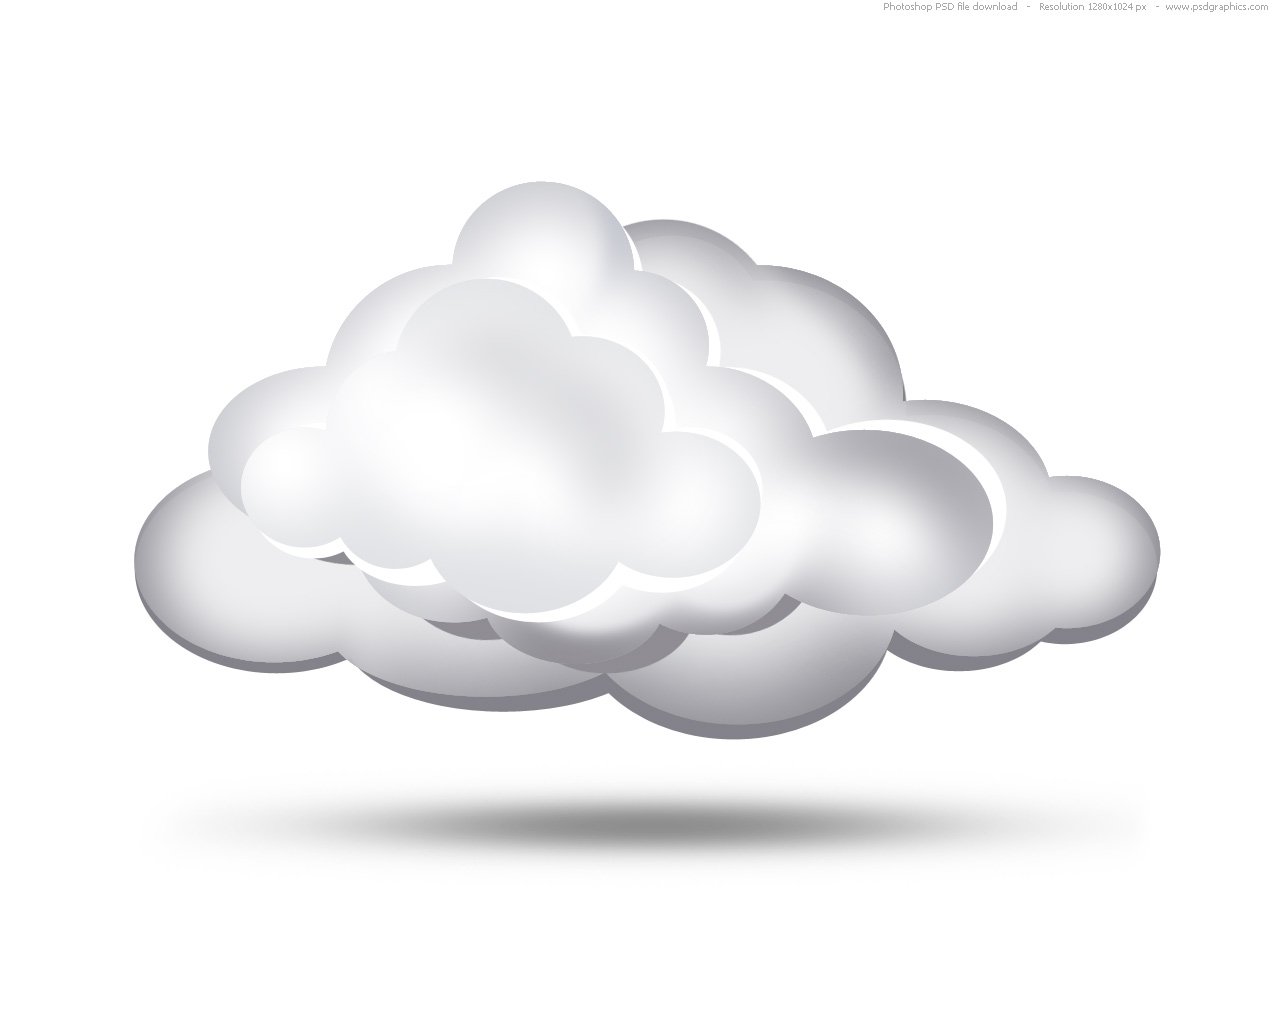 the cloud icon